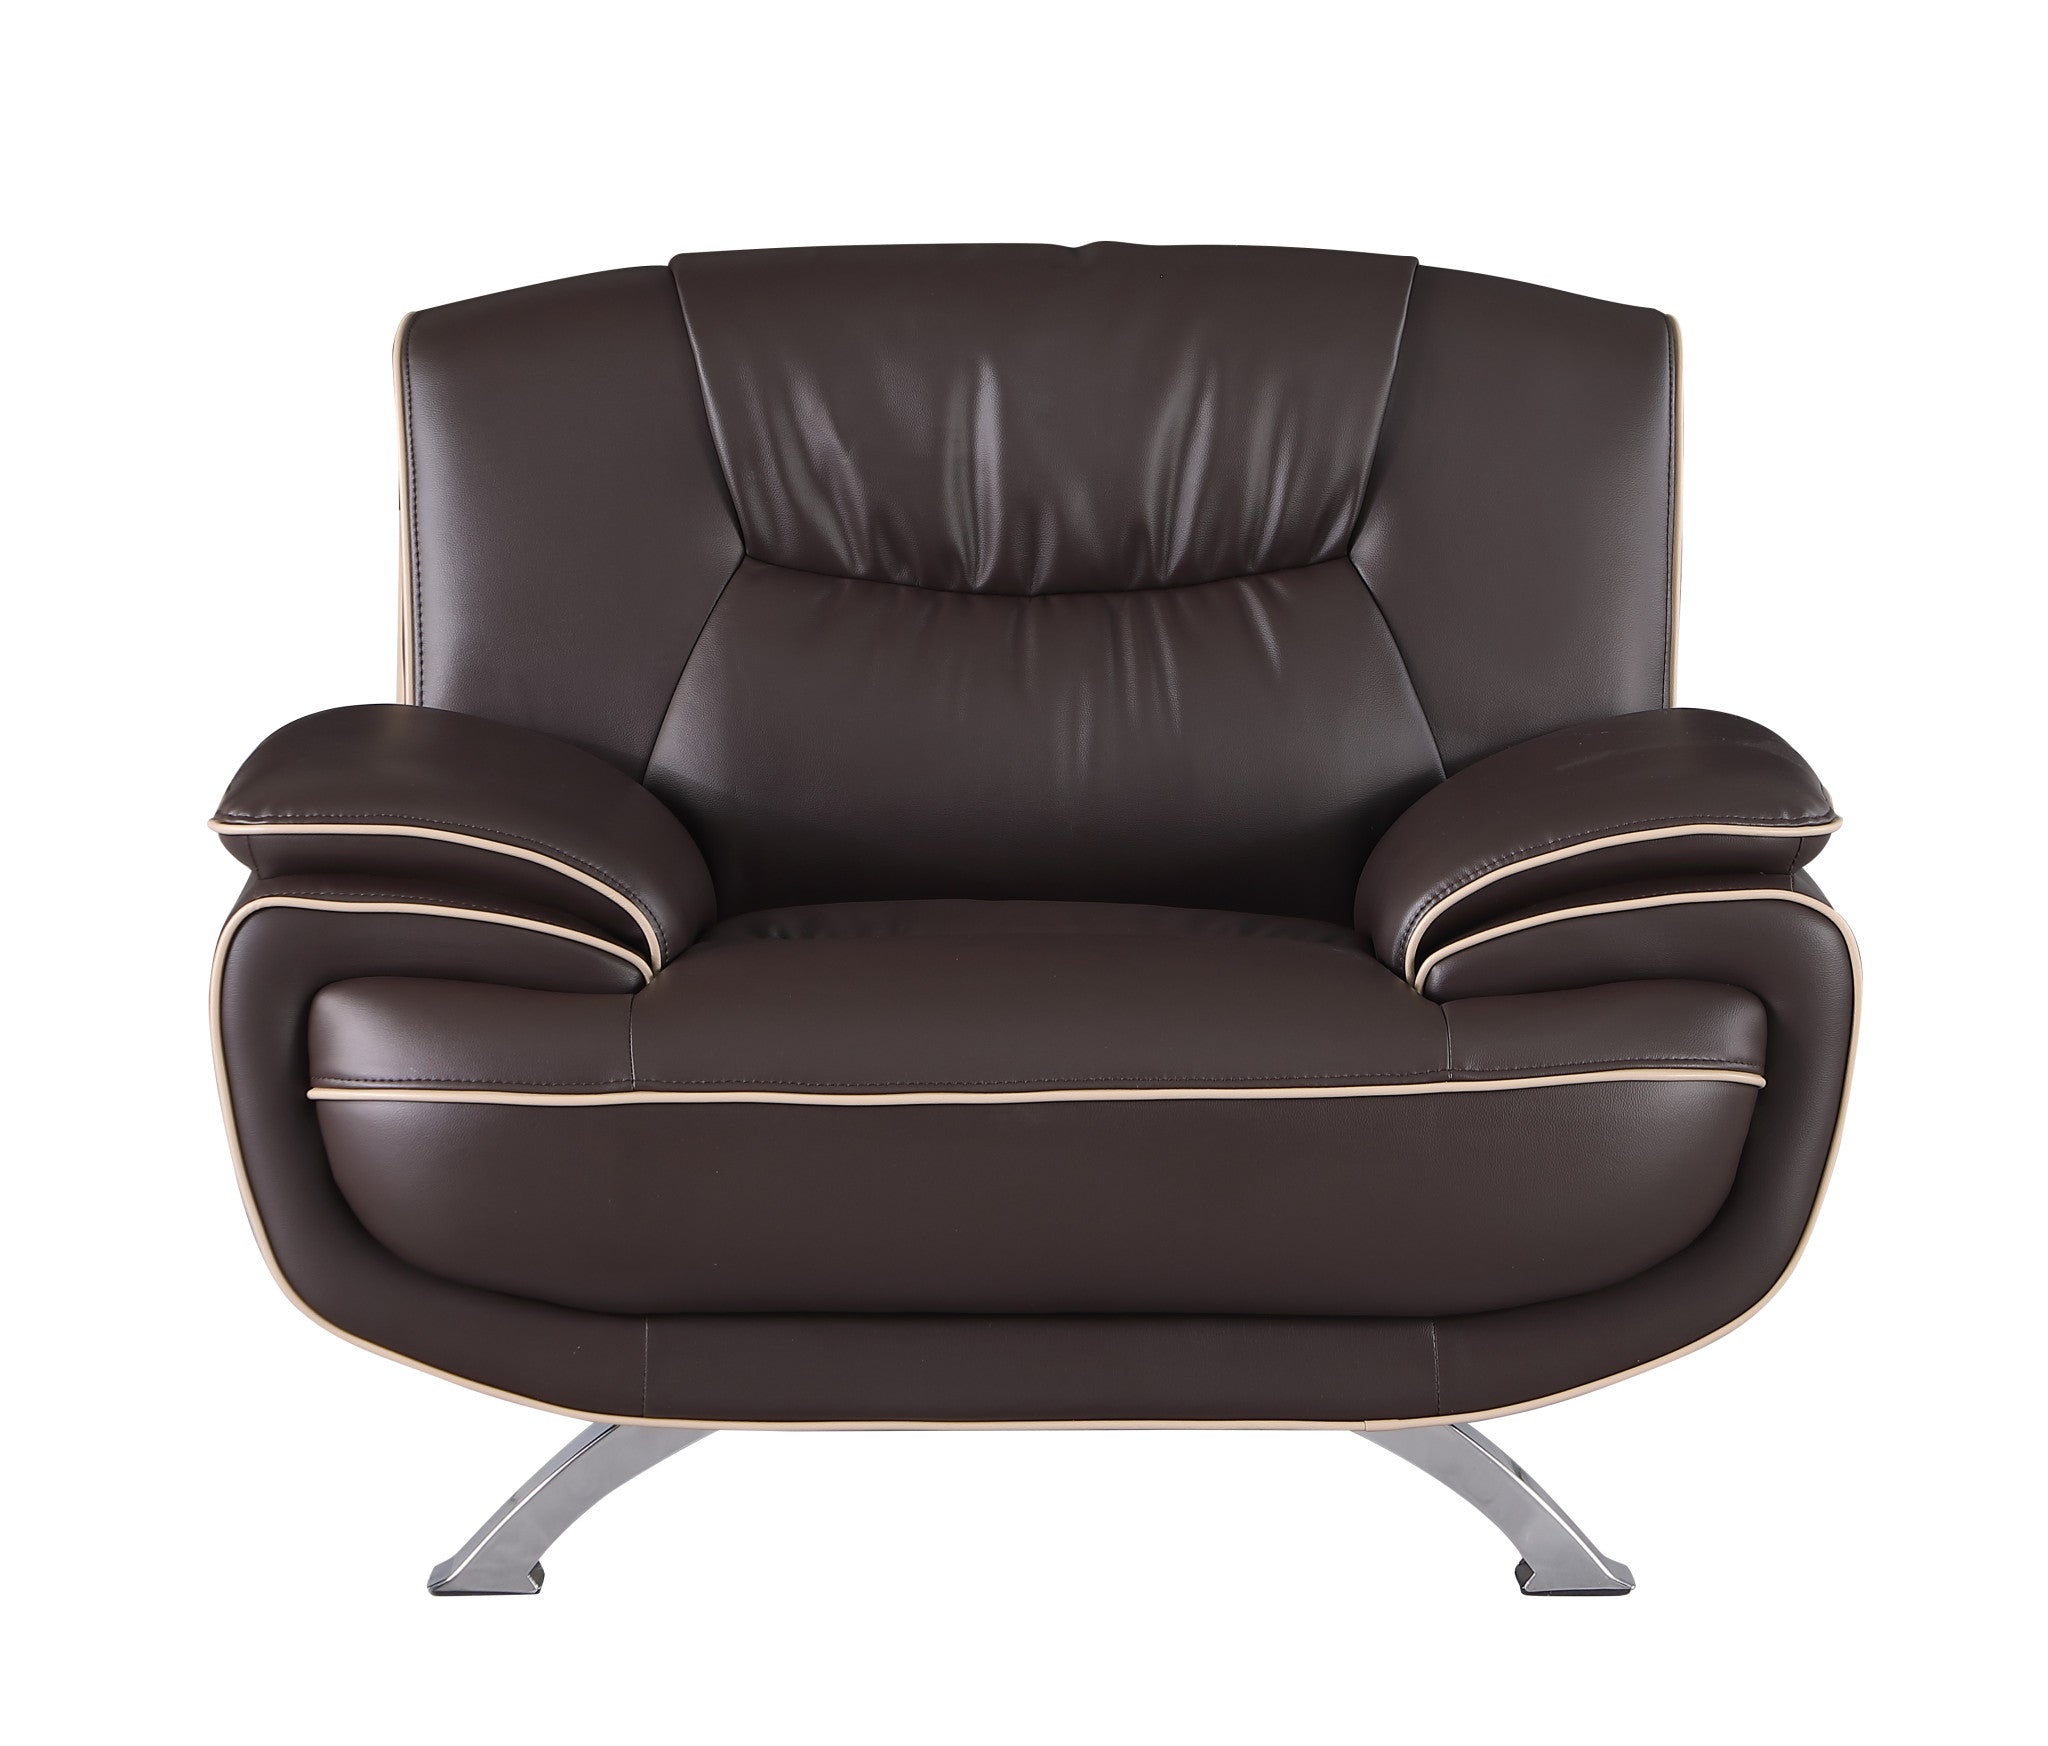 47" Brown and Silver Leather Match Arm Chair